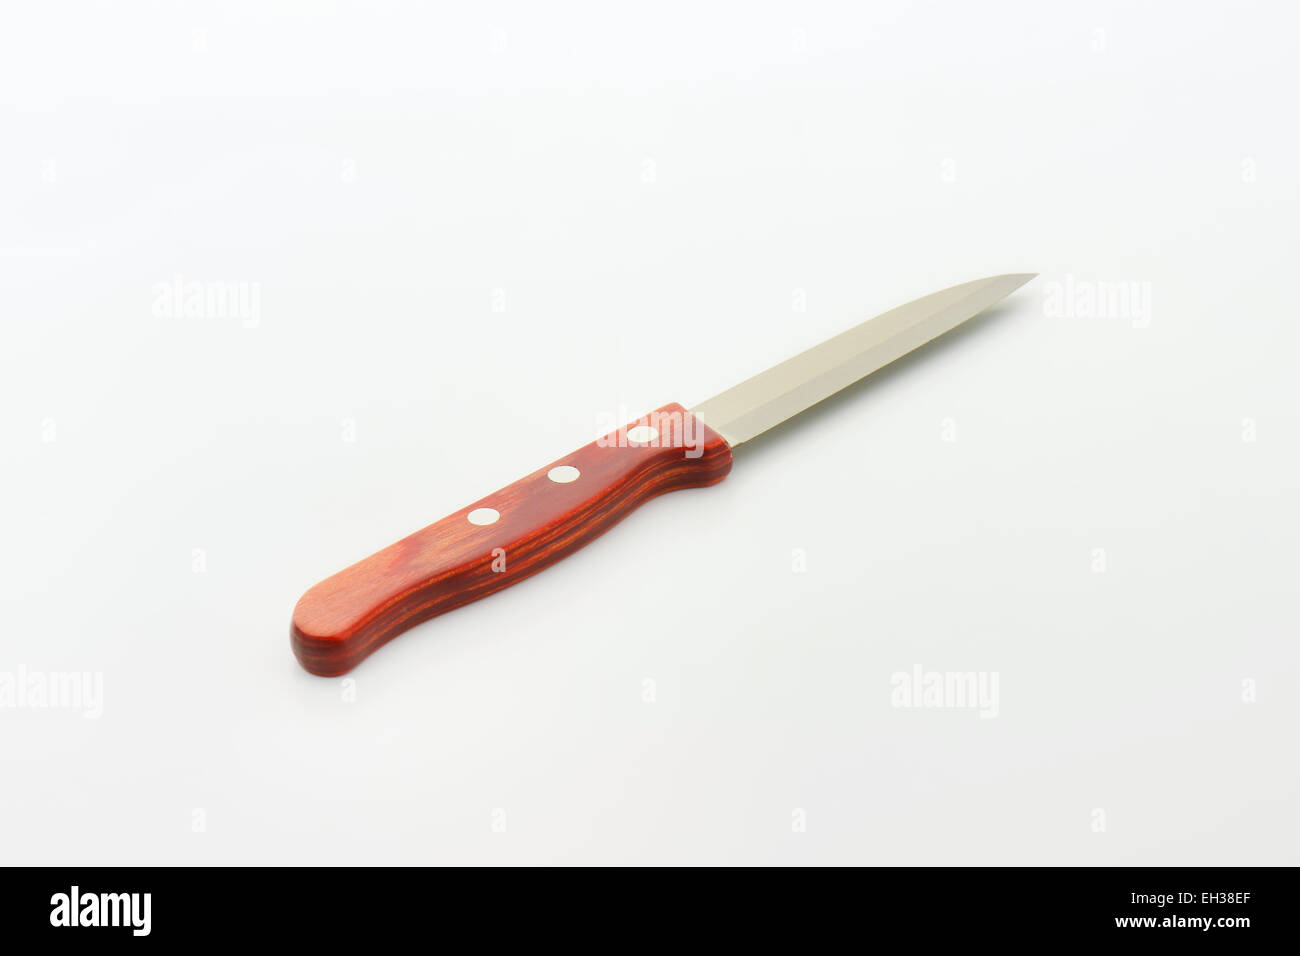 Small vegetable knife with wooden grip on white background Stock Photo